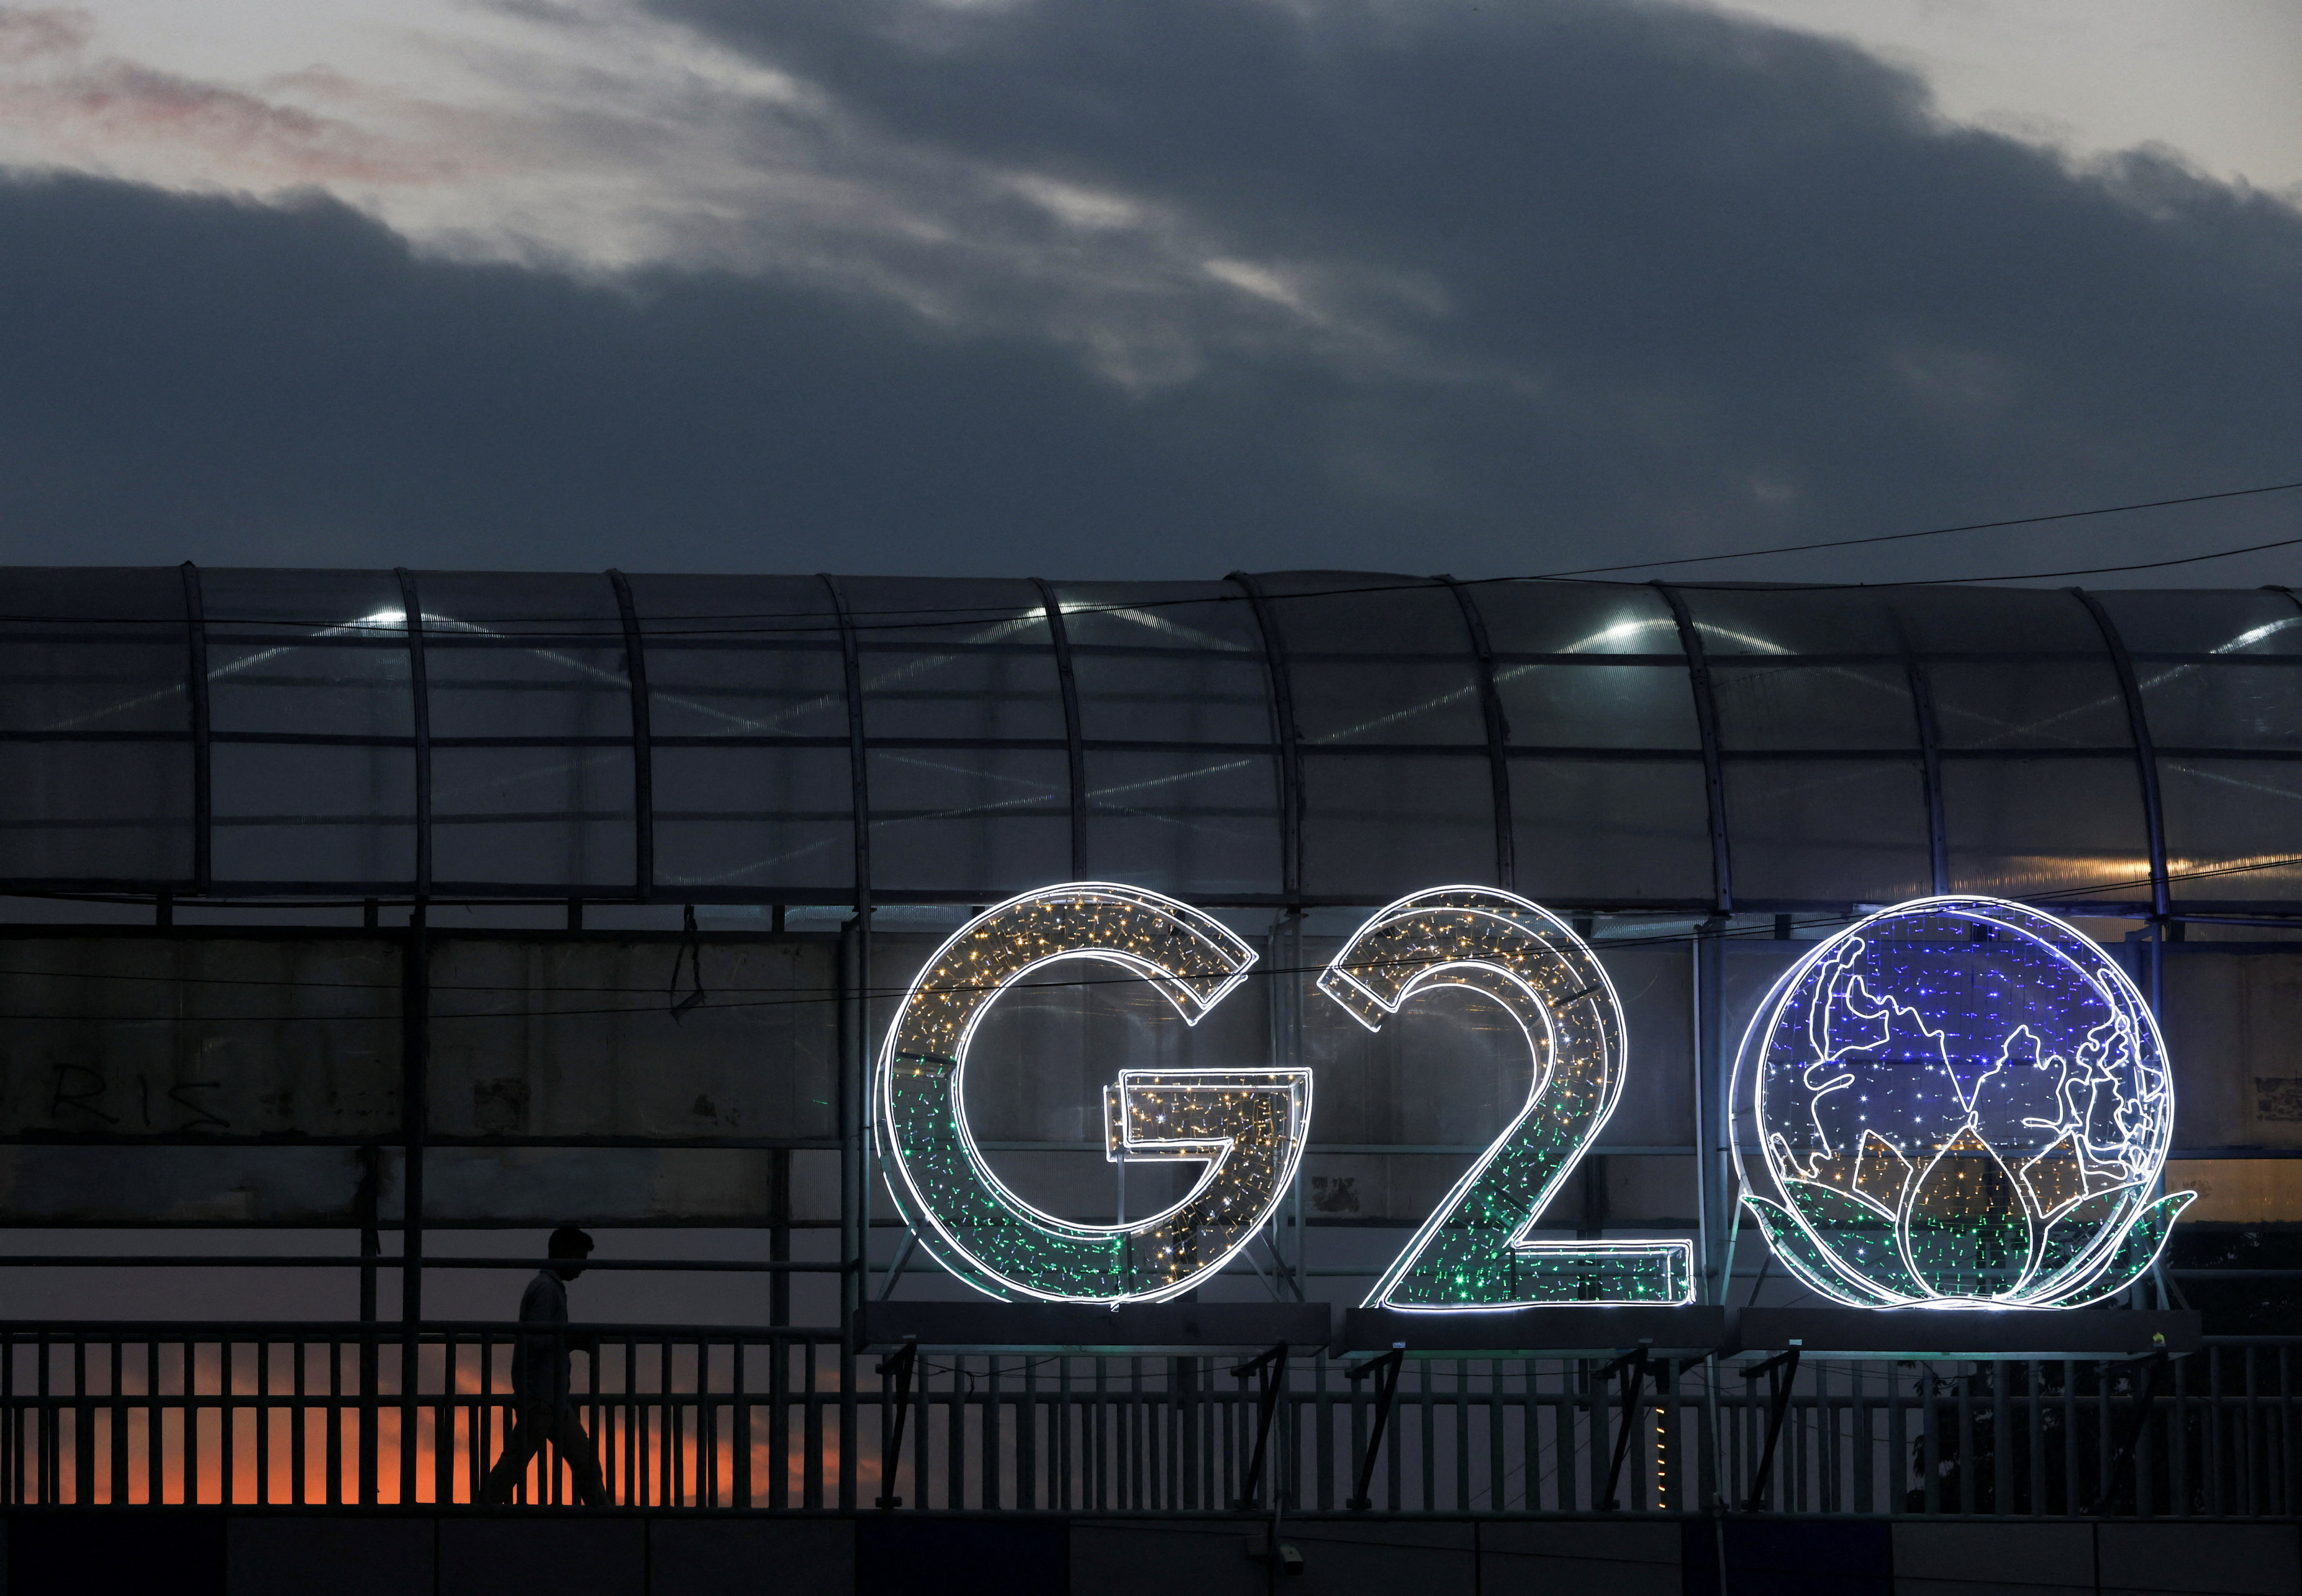 Xi Jinping’s absence from the G20 signals that China wants to “look beyond” the institutions that currently dominate the world, according to one analyst. Photo: Reuters